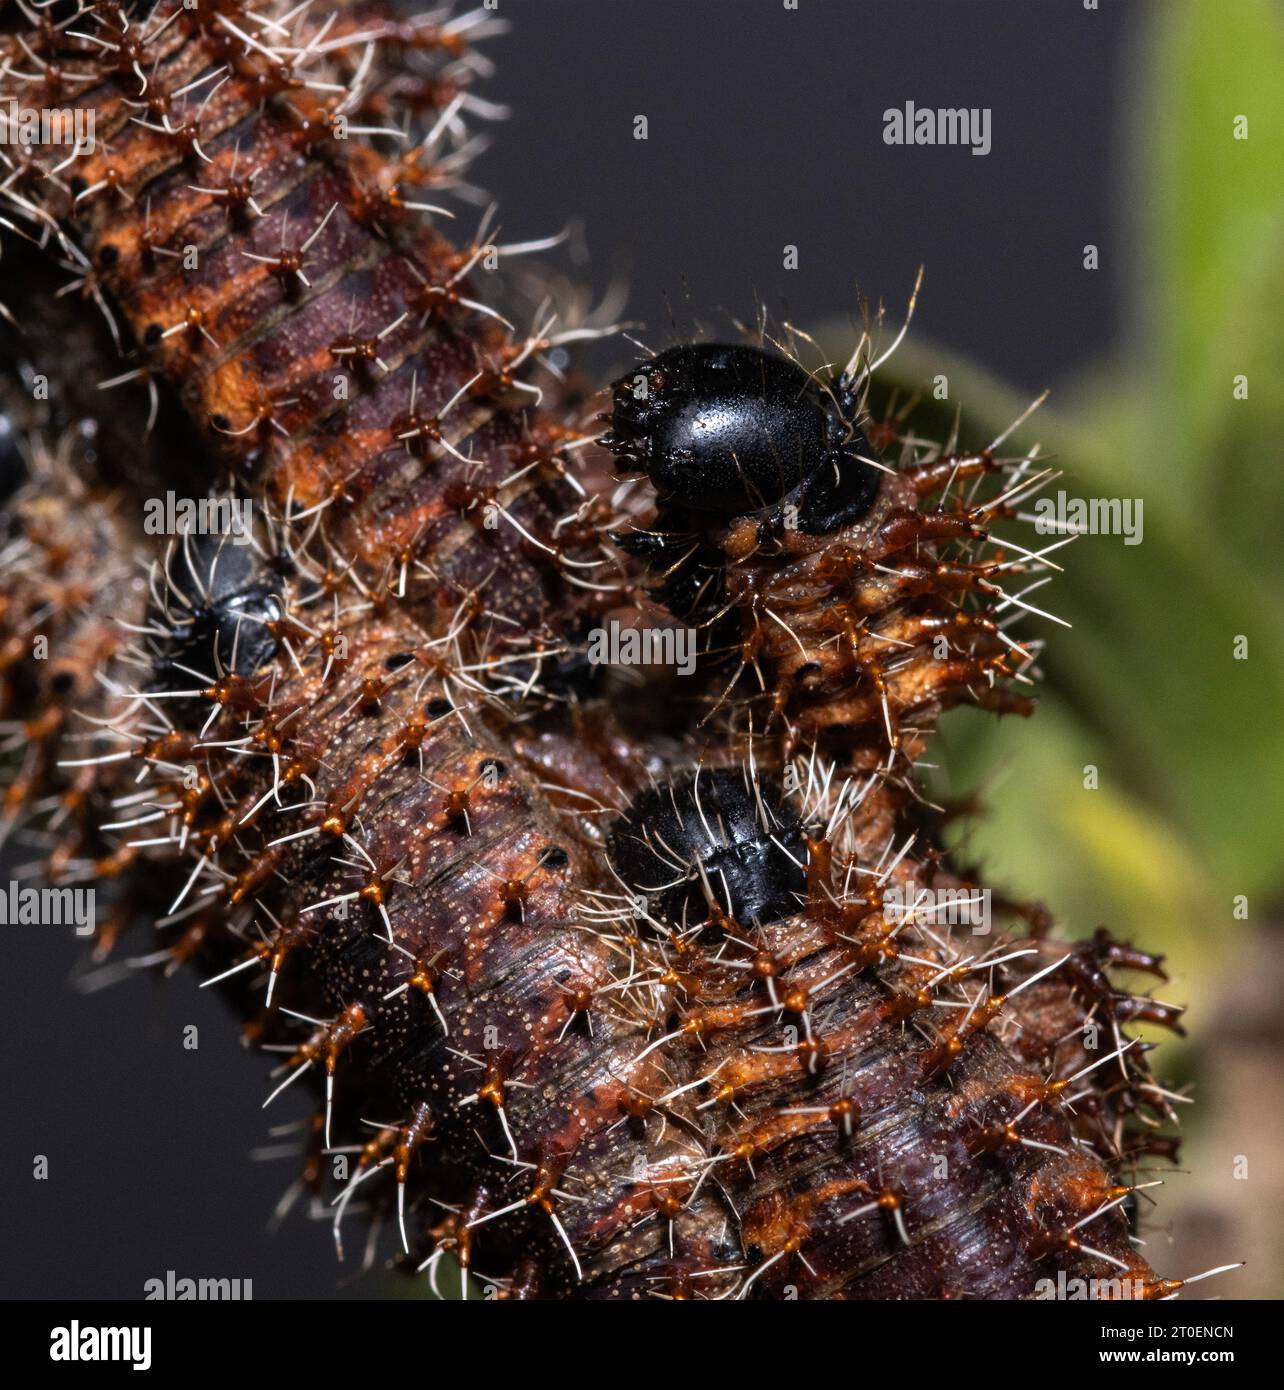 Early instar caterpillars of the Common Emperor Moth appear very different from the mush lager and darker instars prior to pupating. Stock Photo